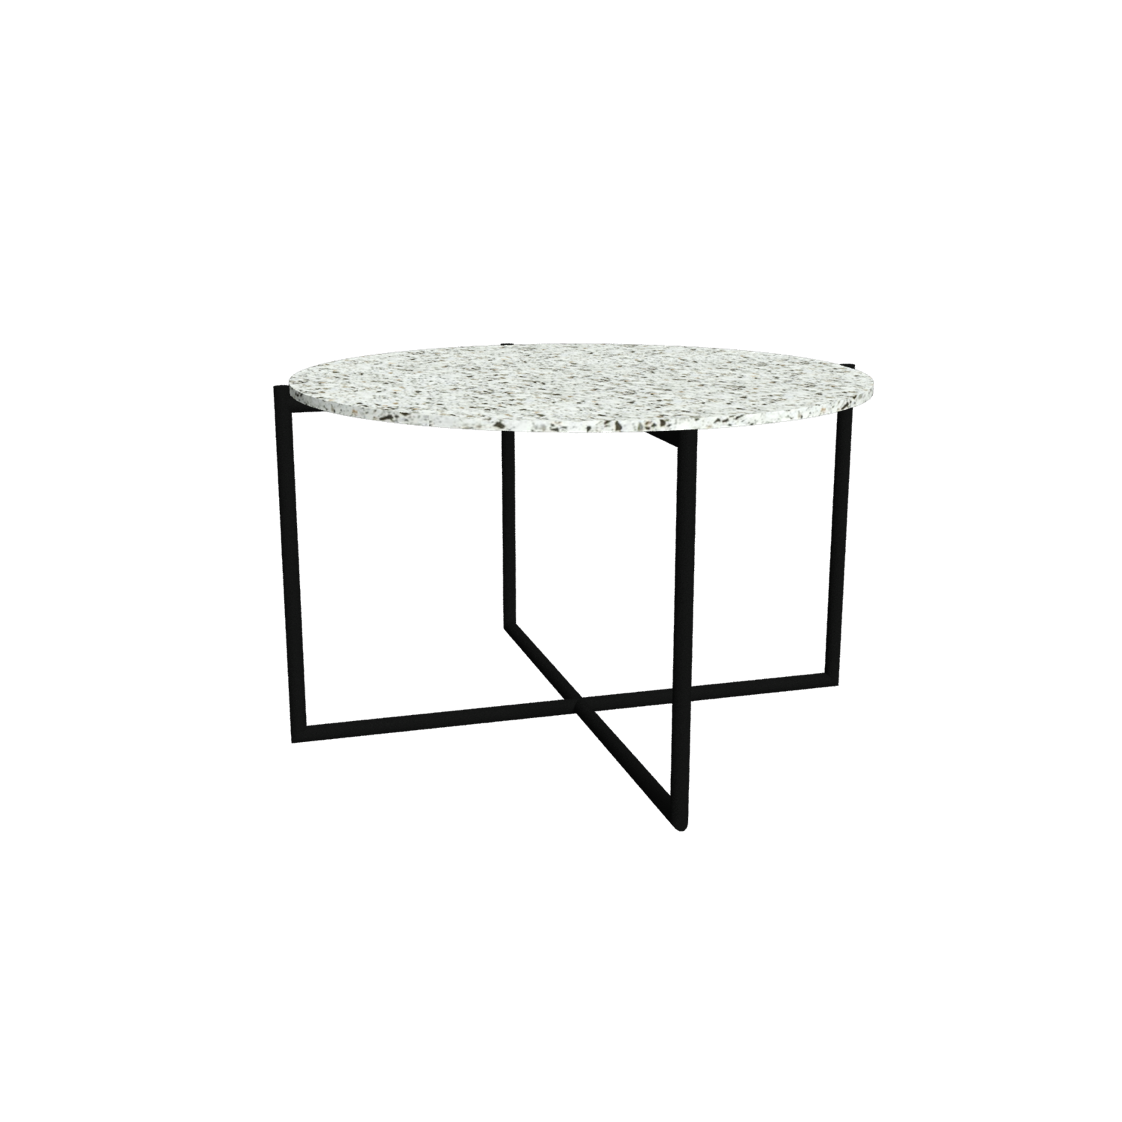 DINING TABLE, ROUND, SMALL - Customer's Product with price 5350.00 ID iKsrPro7JCsFQs4FElmITOc0